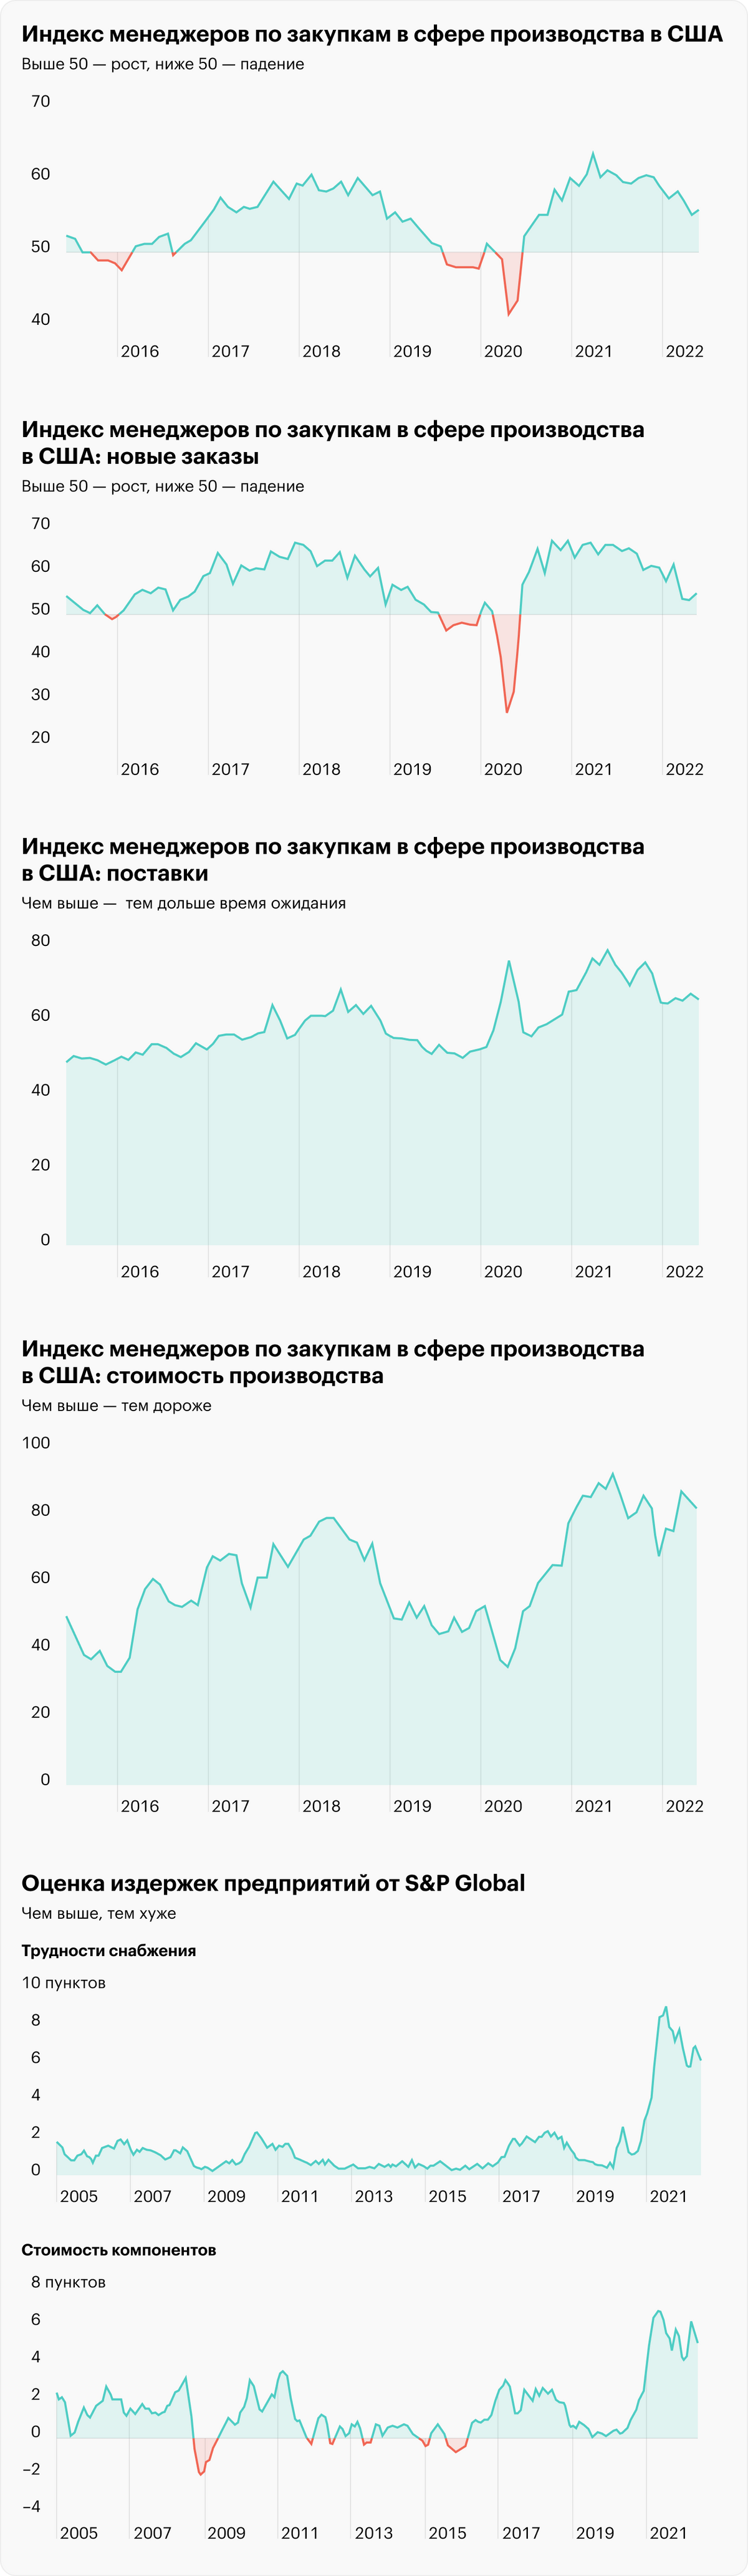 Источник: Daily Shot, ISM Manufacturing PMI, New orders unexpectedly strengthened, The index of supplier delivery times, Price pressures remain elevated, Commodity supply and&nbsp;price pressures